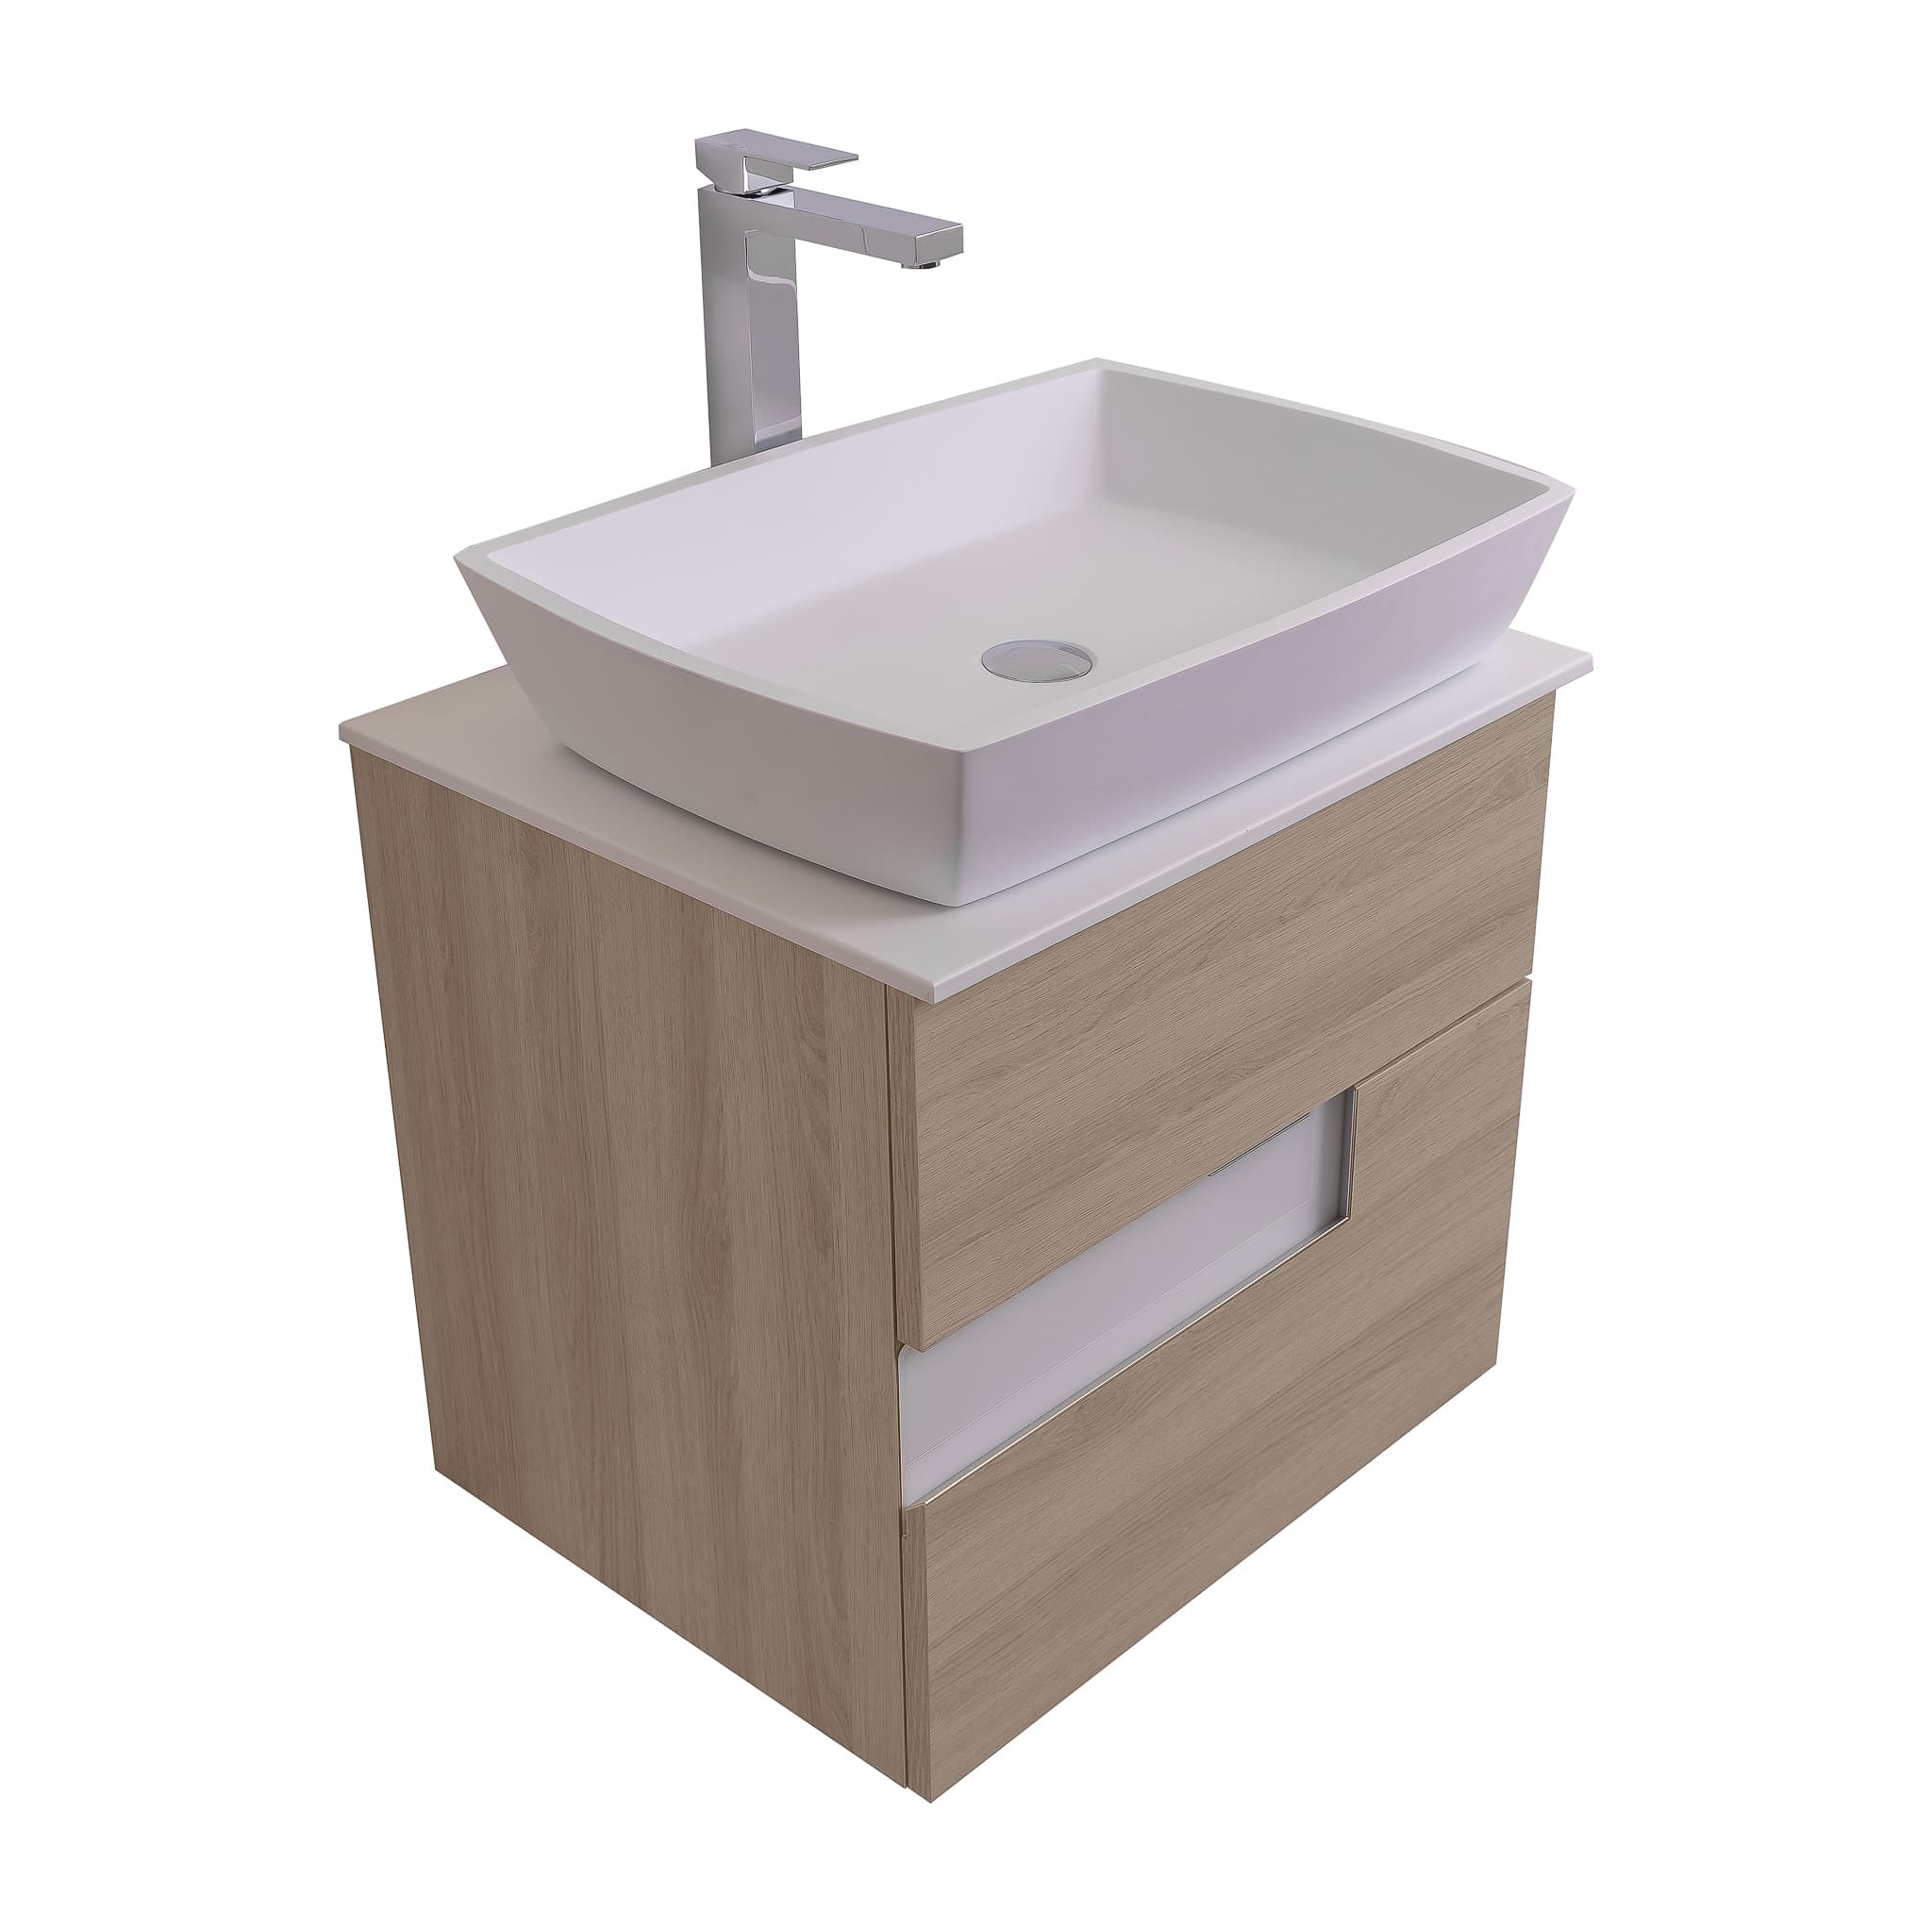 Vision 23.5 Natural Light Wood Cabinet, Solid Surface Flat White Counter And Square Solid Surface White Basin 1316, Wall Mounted Modern Vanity Set